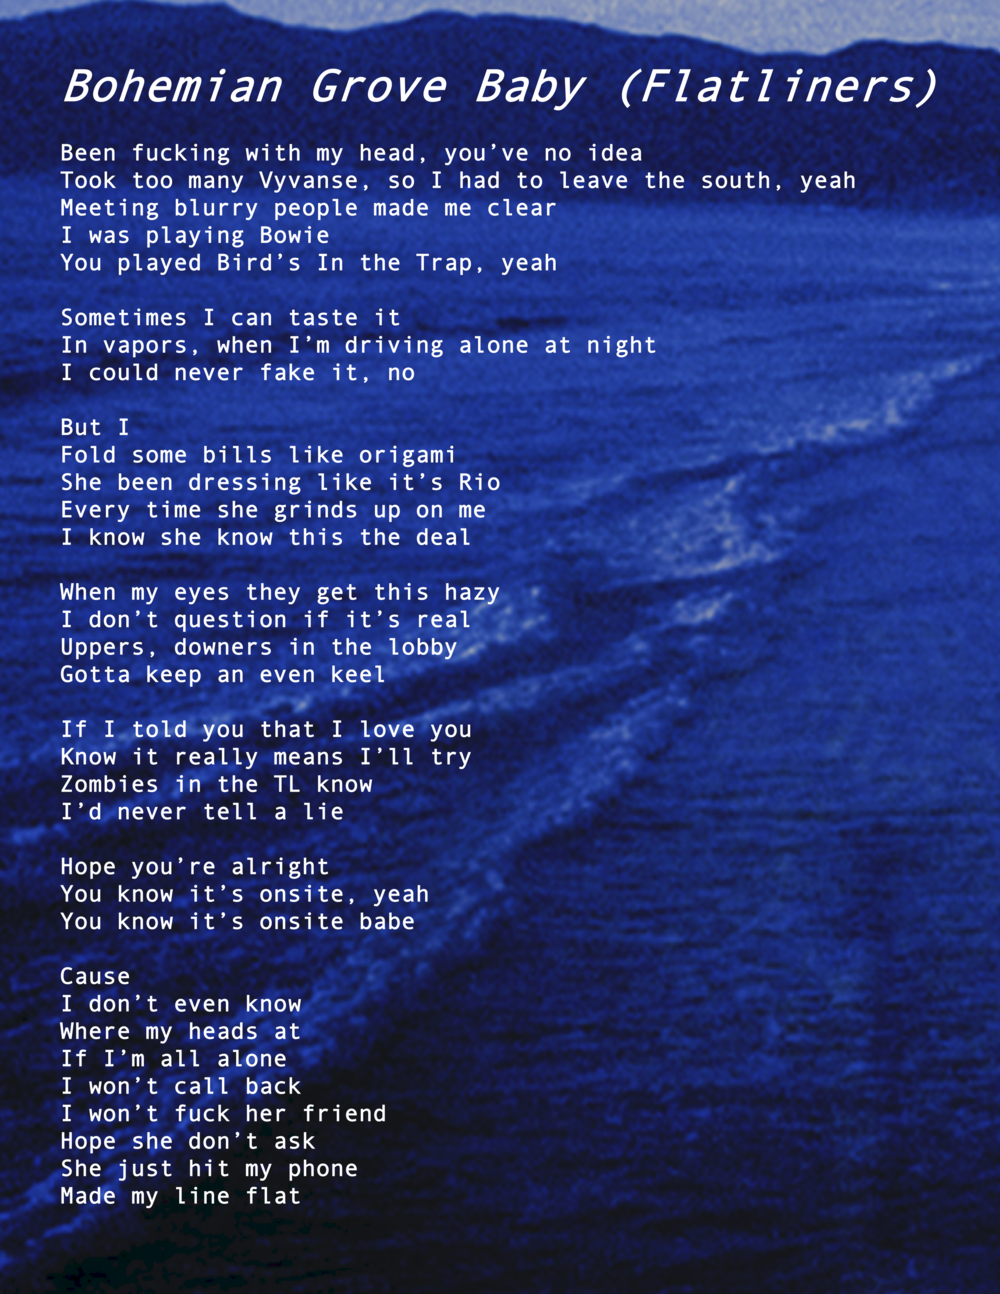 Page 1 Bohemian Grove Baby (Flatliners) Lyric Sheet-1 (dragged).png